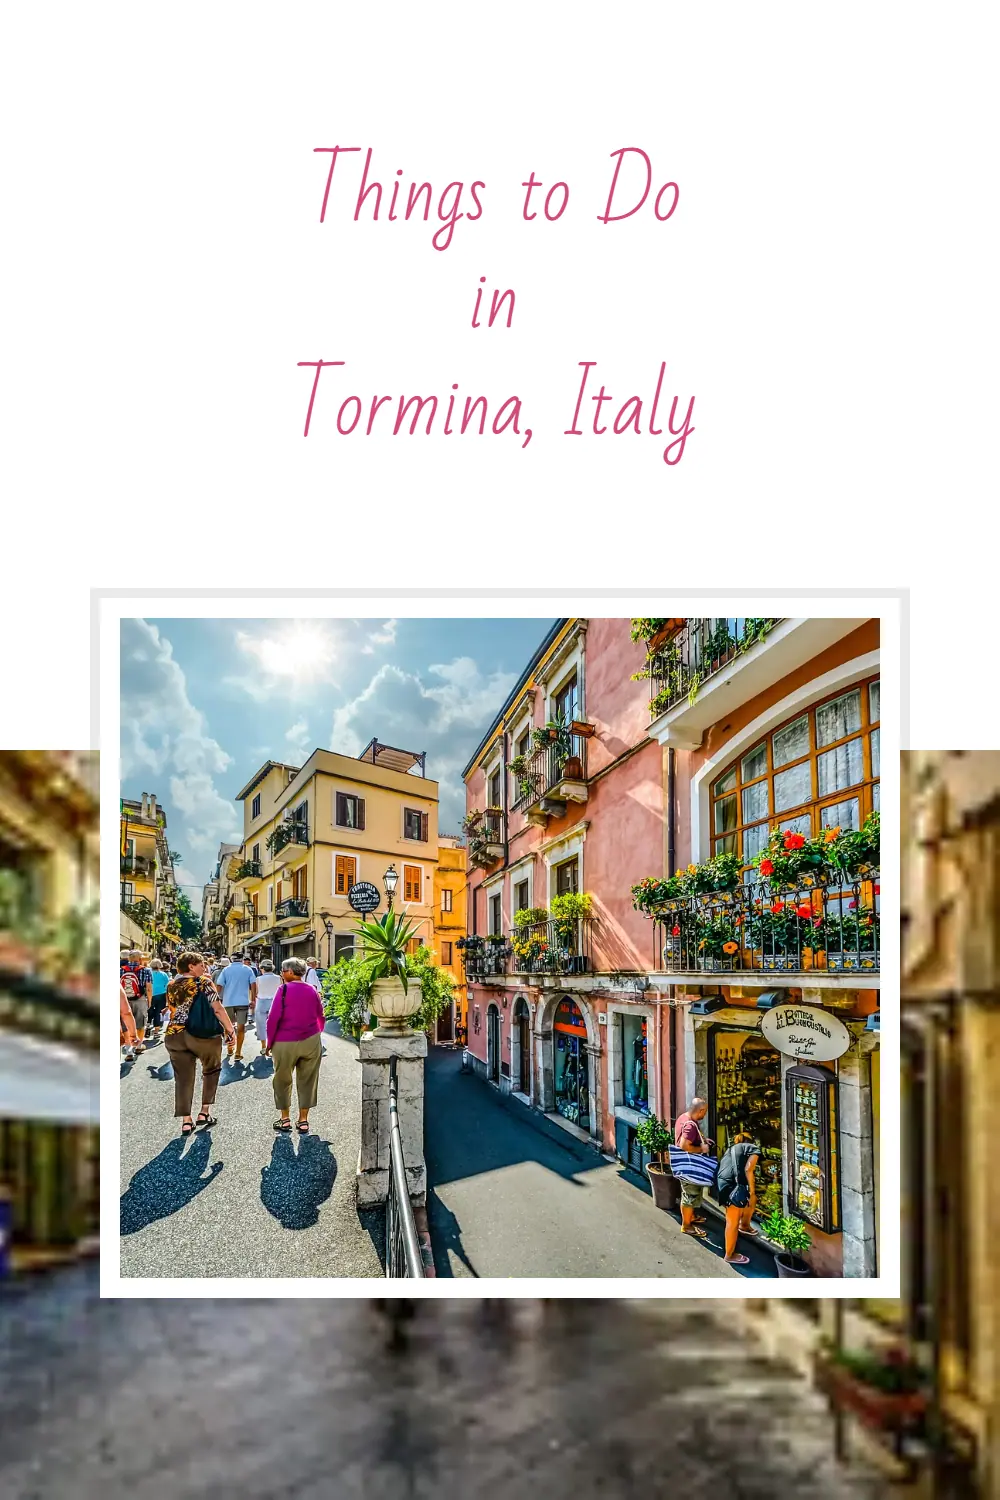 Looking for a comprehensive guide to explore Taormina, Sicily? Get all the info right here! From the peaceful Municipal Gardens to the ancient Theatre, and relaxing at the splendid beaches to dining at local eateries, we've got it all covered. Plus, insider tips on getting around and the best places to stay. Happy wandering!